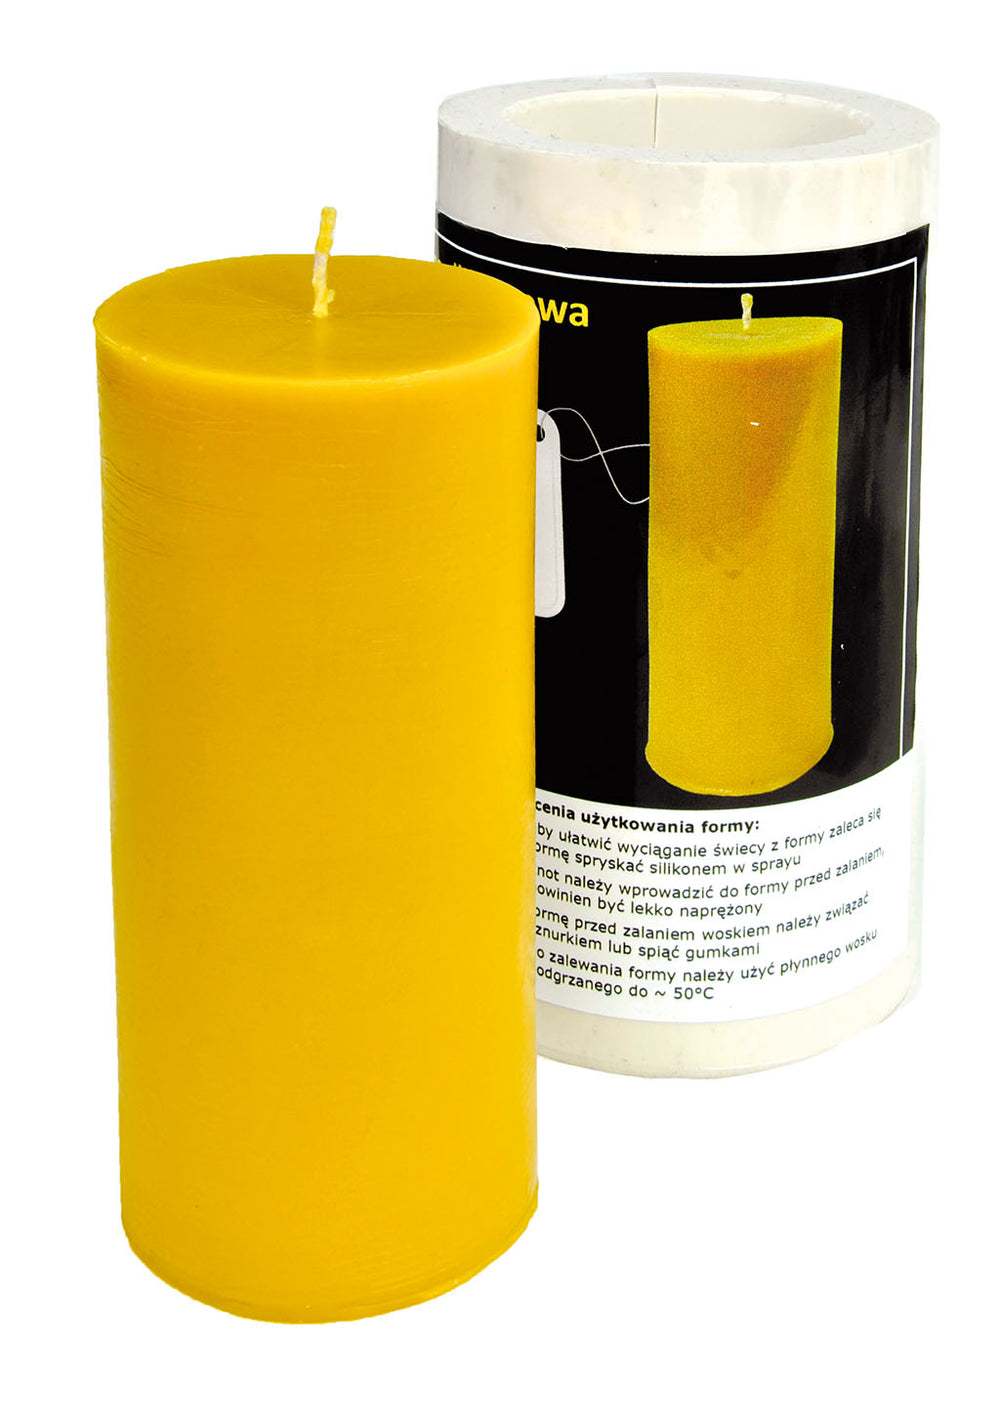 Smooth Cylinder Candle Mold